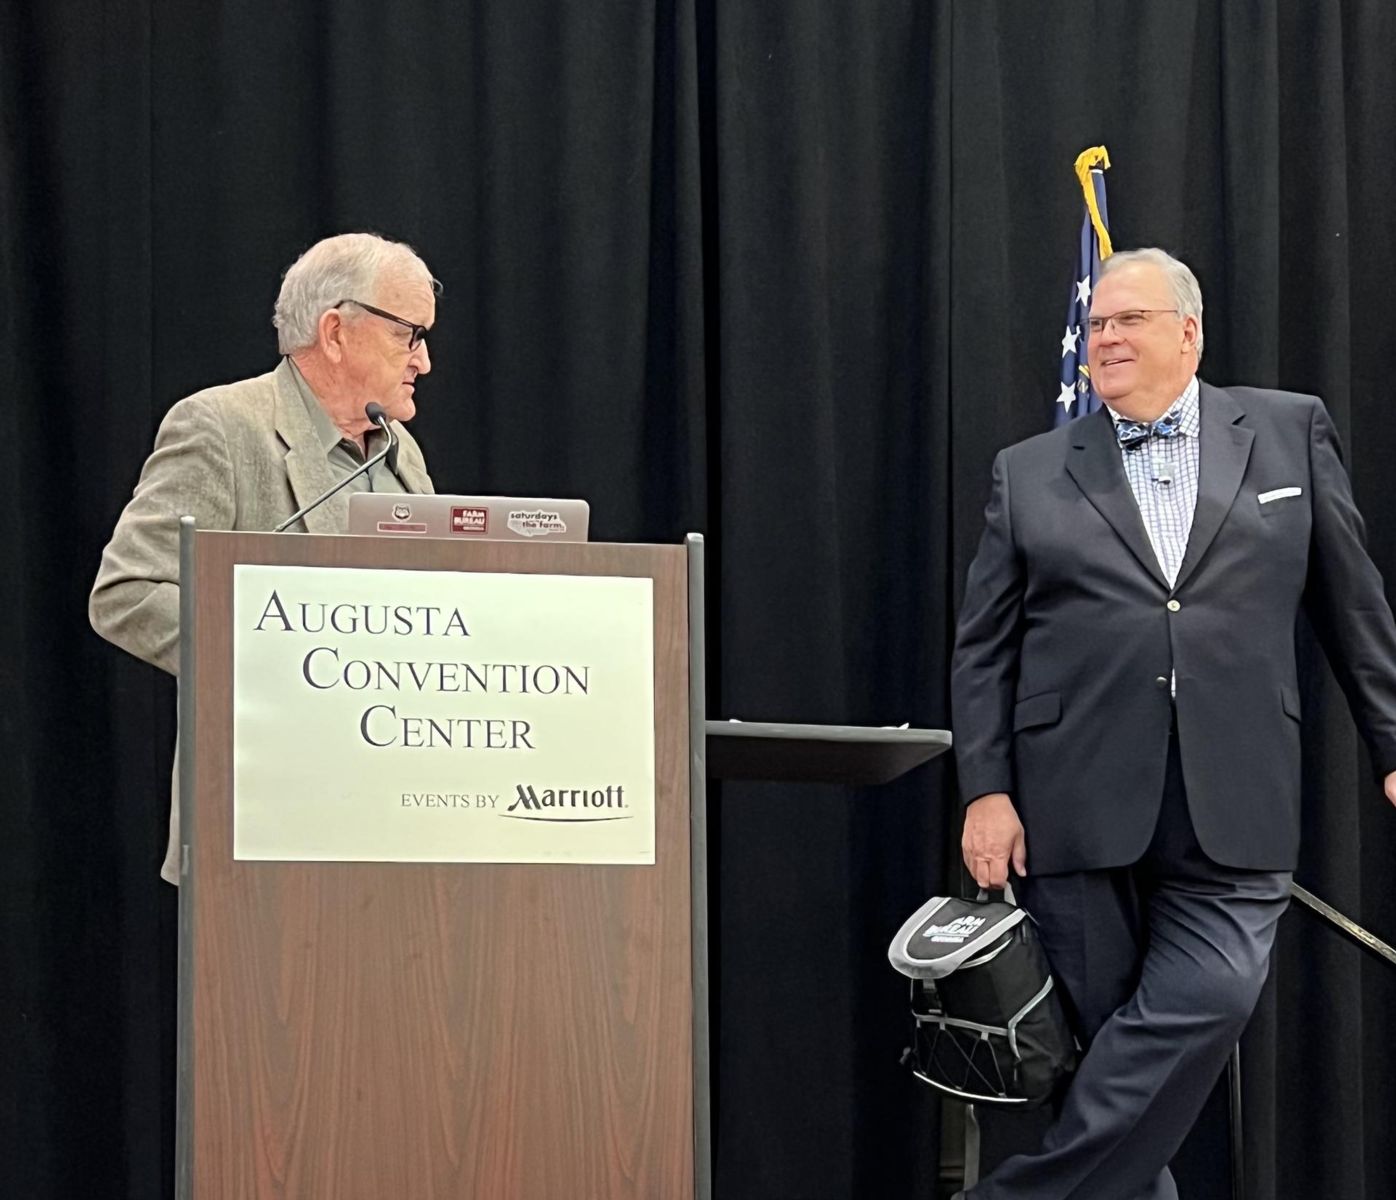 GFB President Tom McCall thanks Roger Rickard of Voices in Advocacy for his keynote address at the Presidents' Conference earlier this week